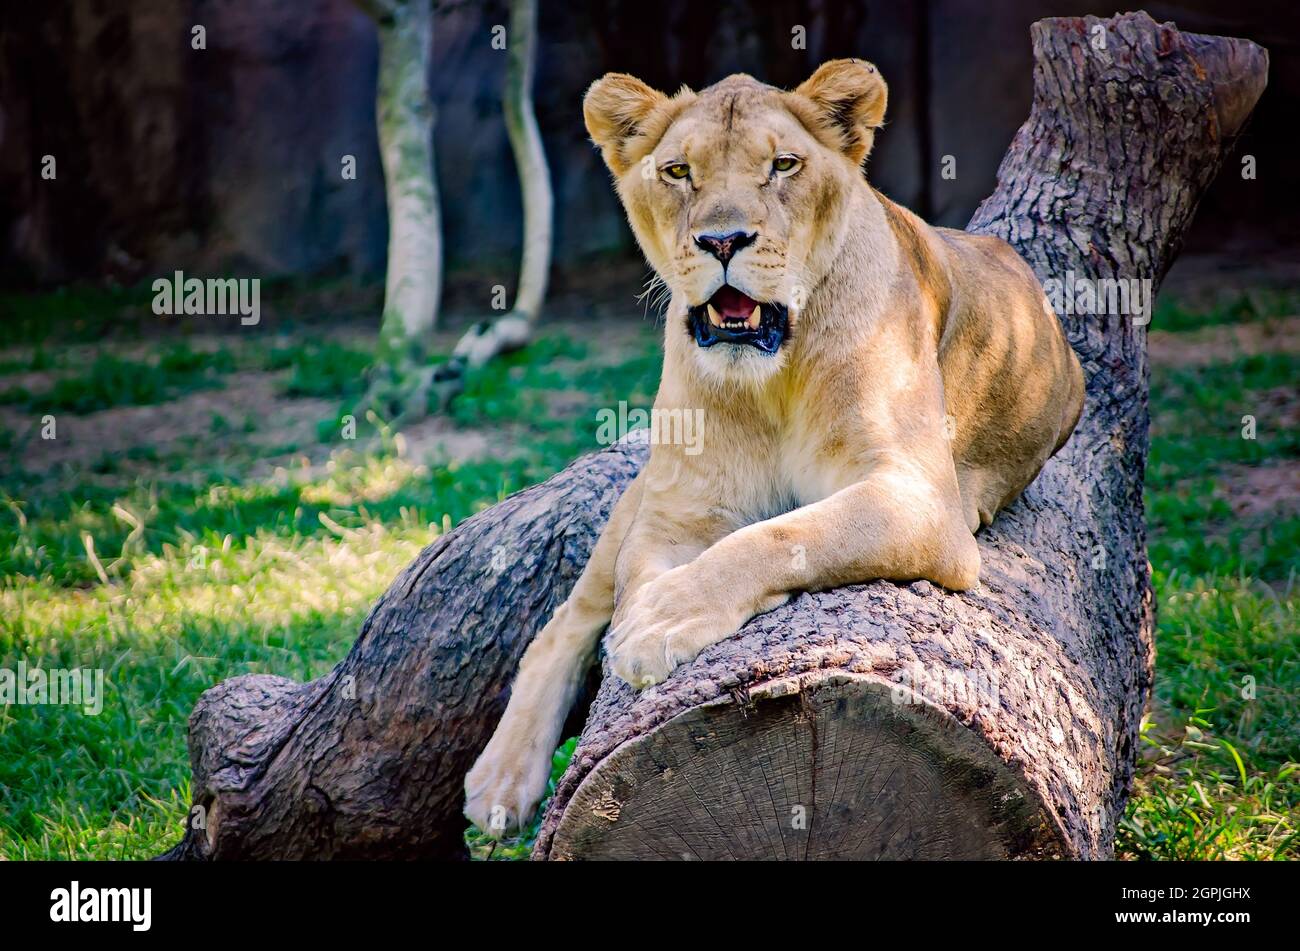 A lioness (Panthera Leo) lays on a log at the Memphis Zoo, September 8, 2015, in Memphis Tennessee. The zoo features more than 3,500 animals. Stock Photo